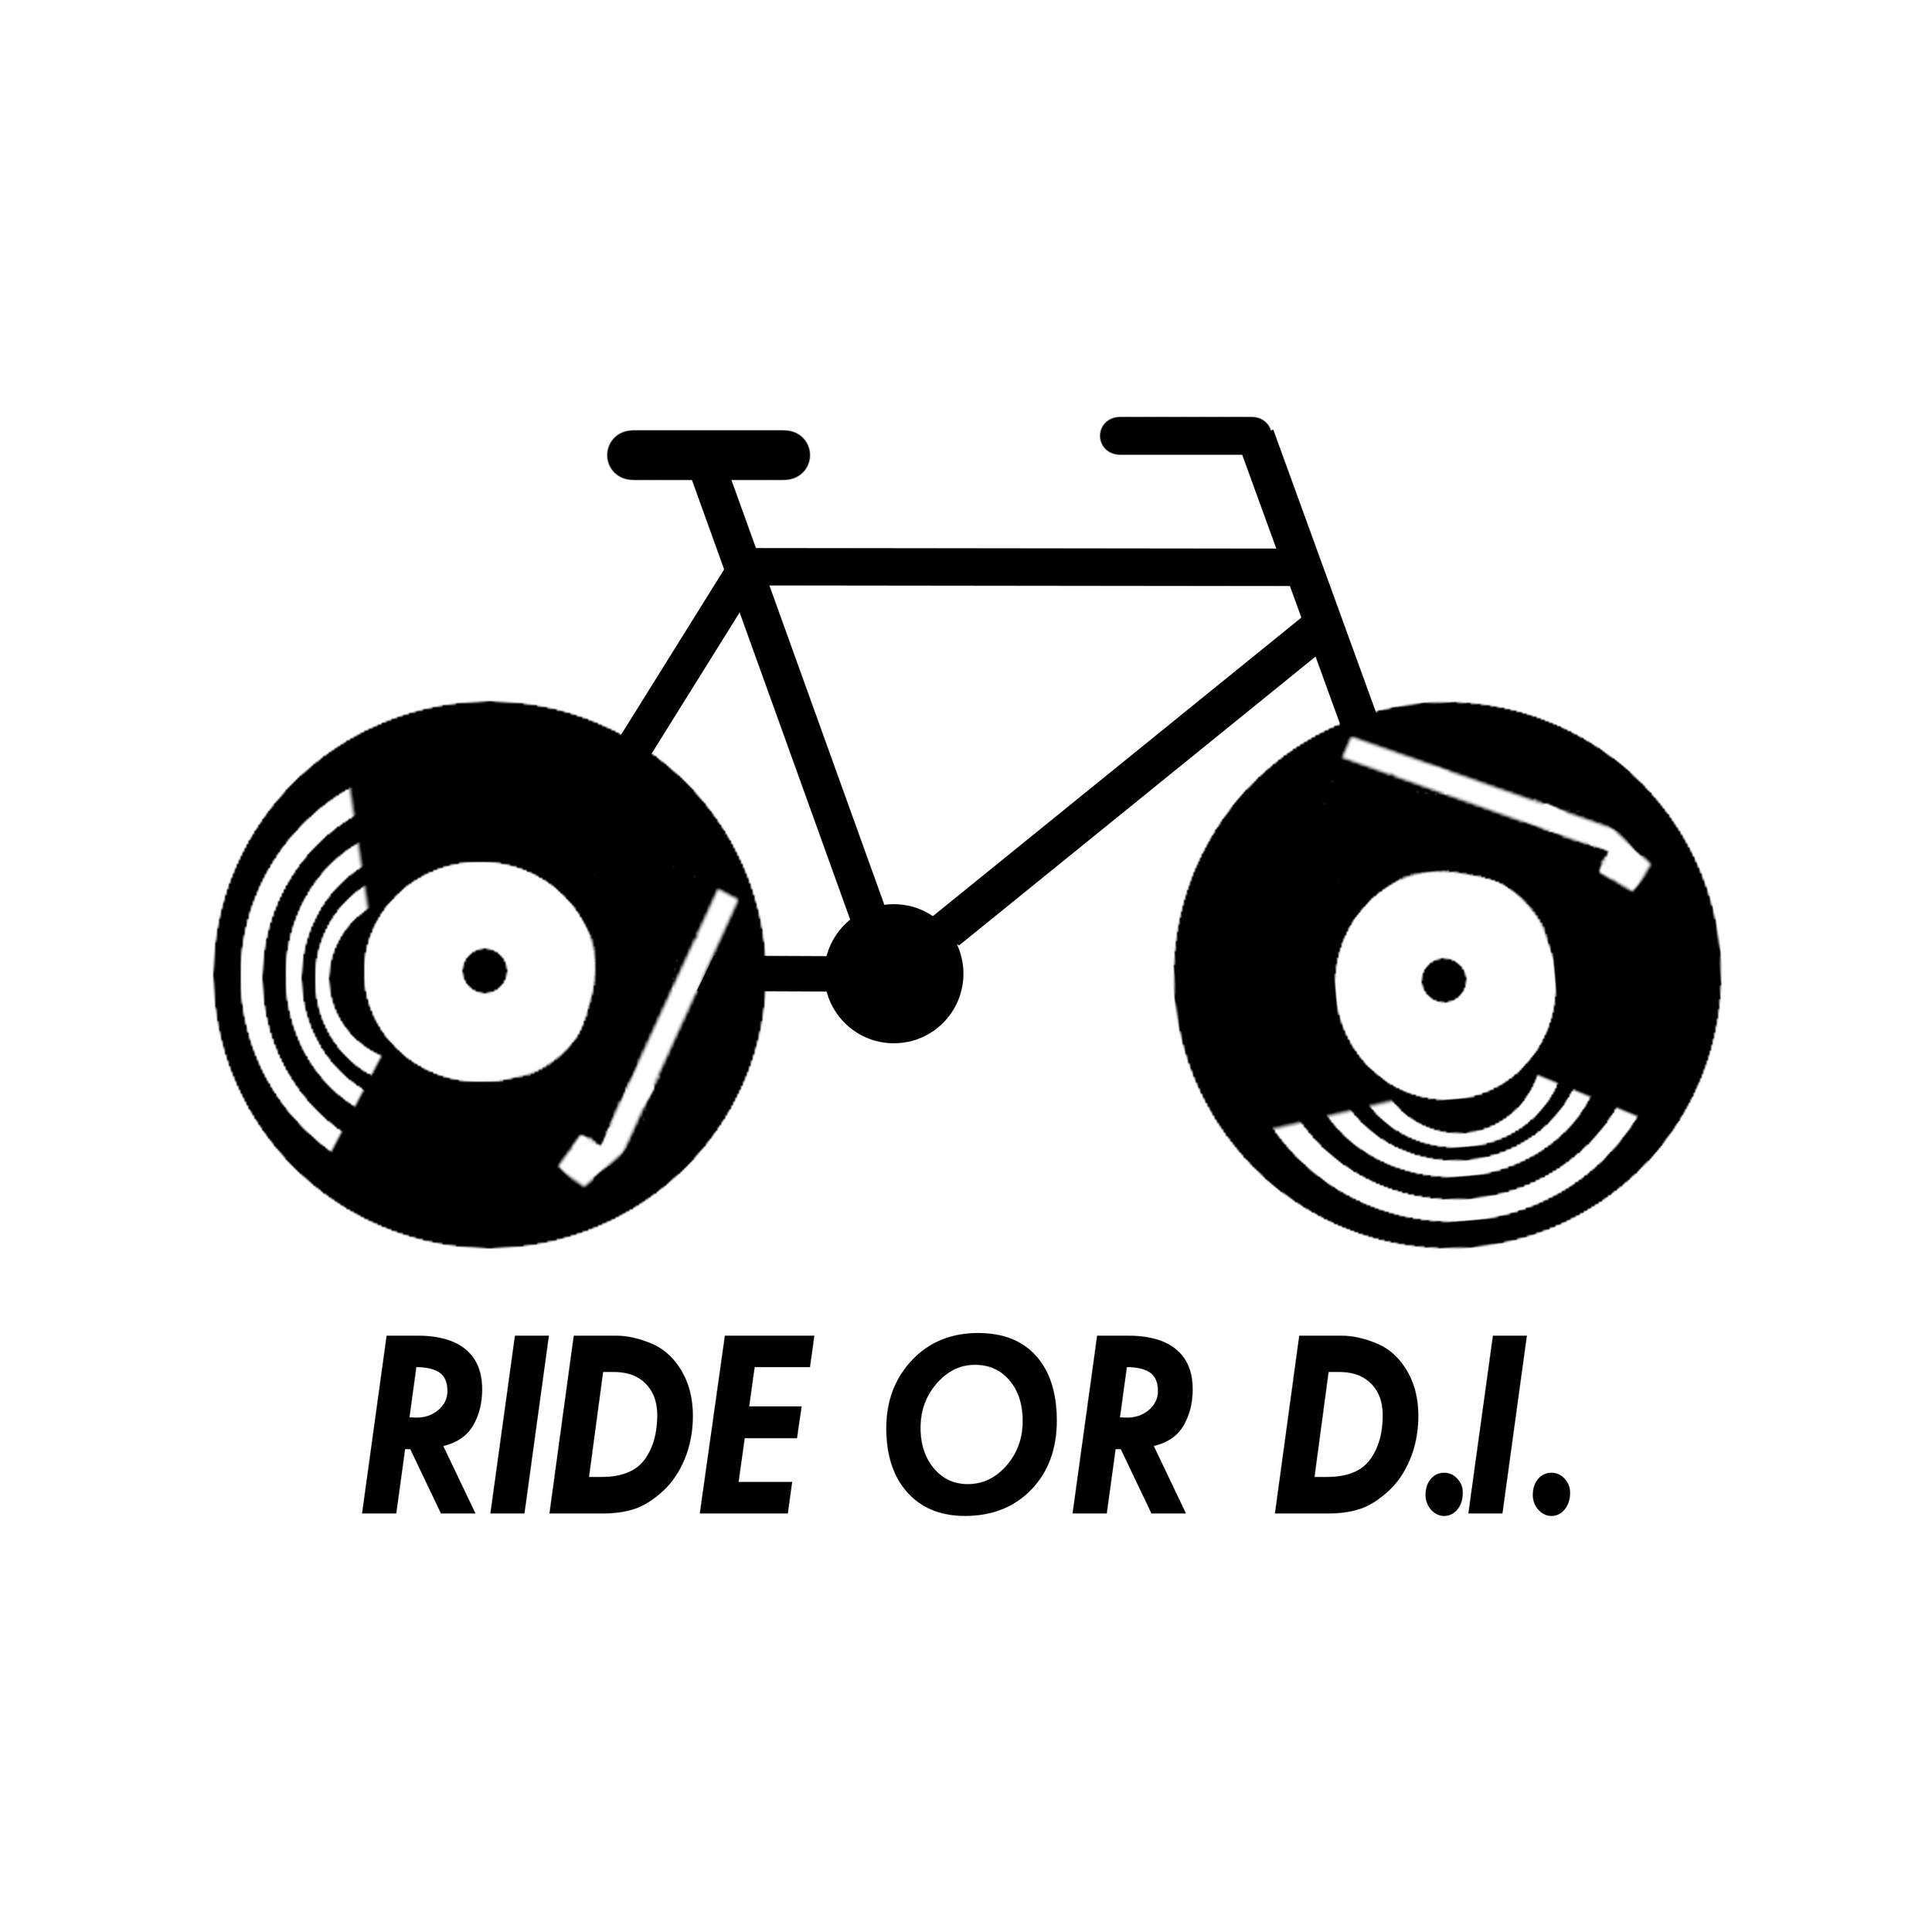 Ride or D.I.